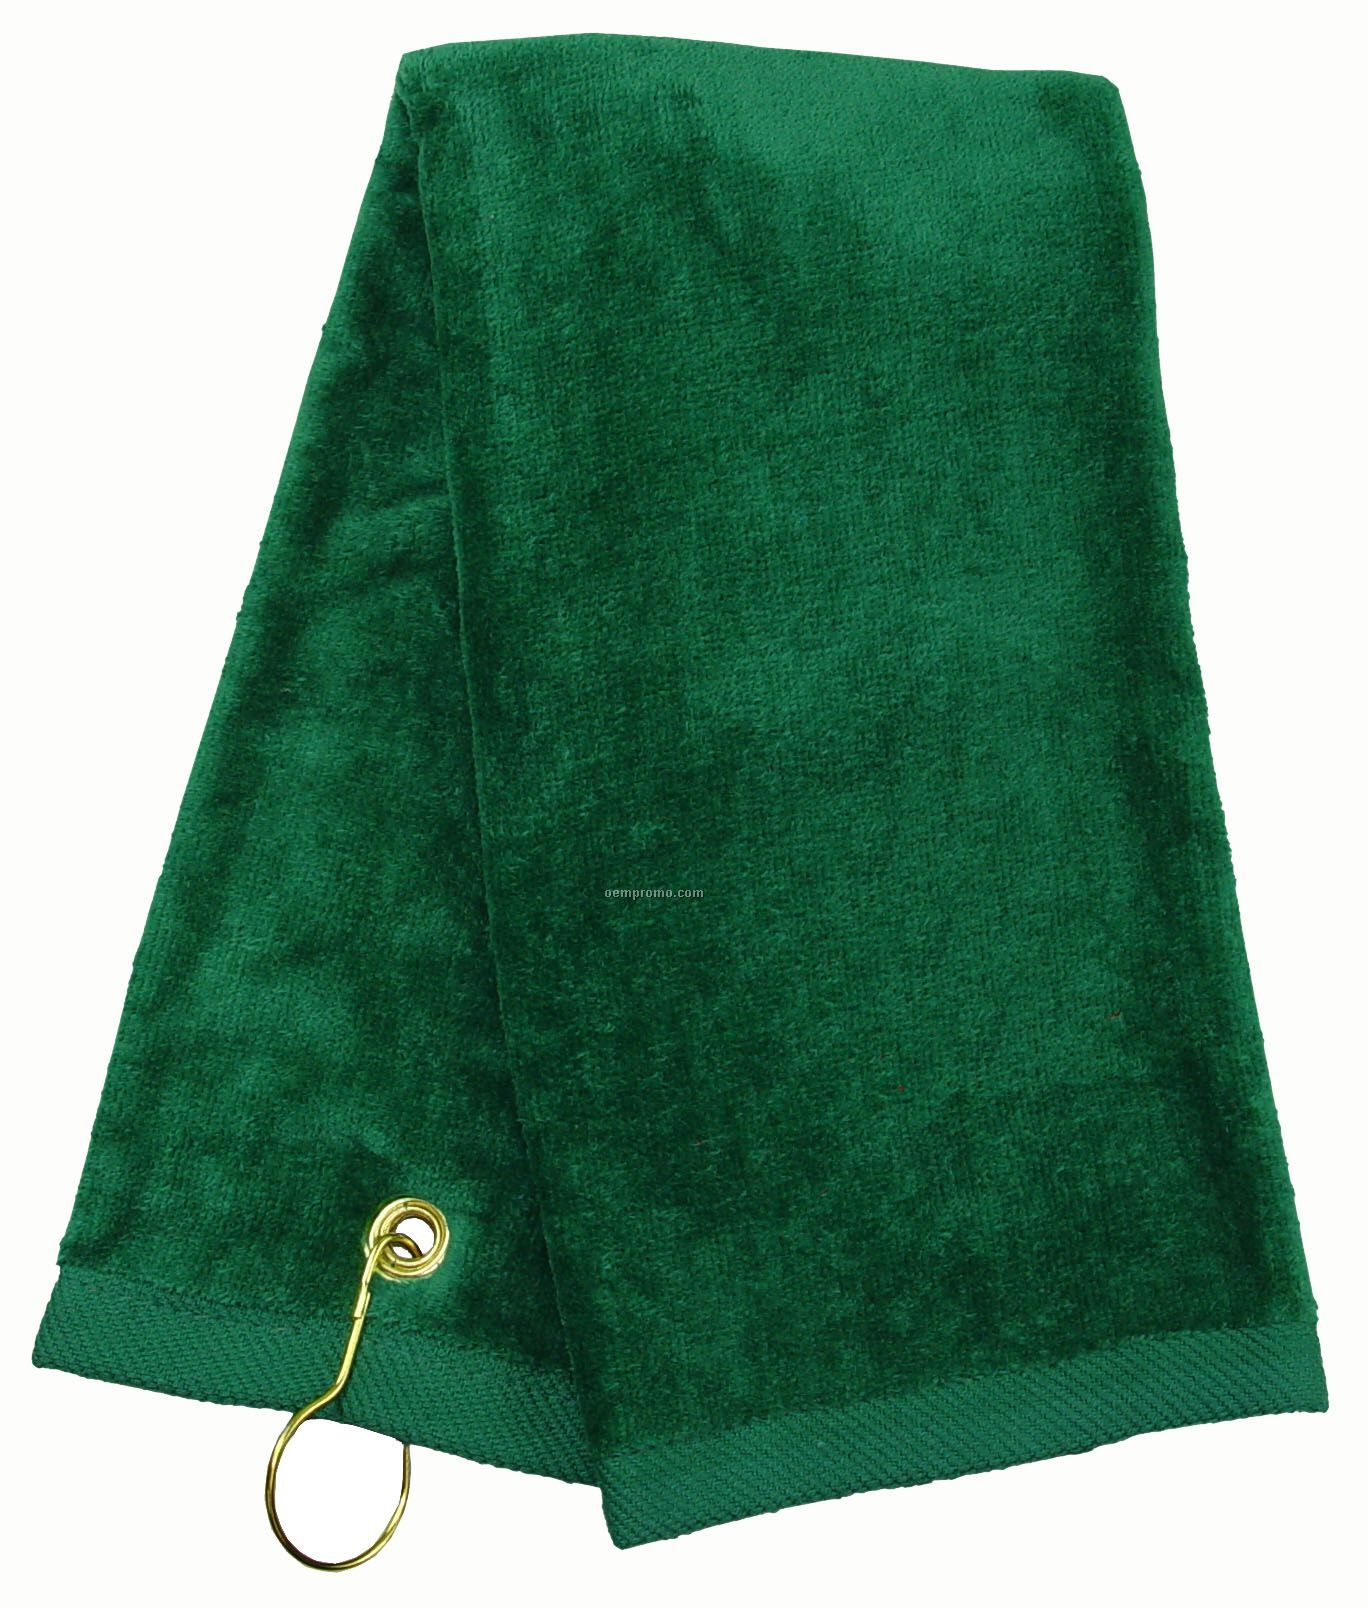 Golf Towel Tri-fold Style With Hook & Grommet - Blank